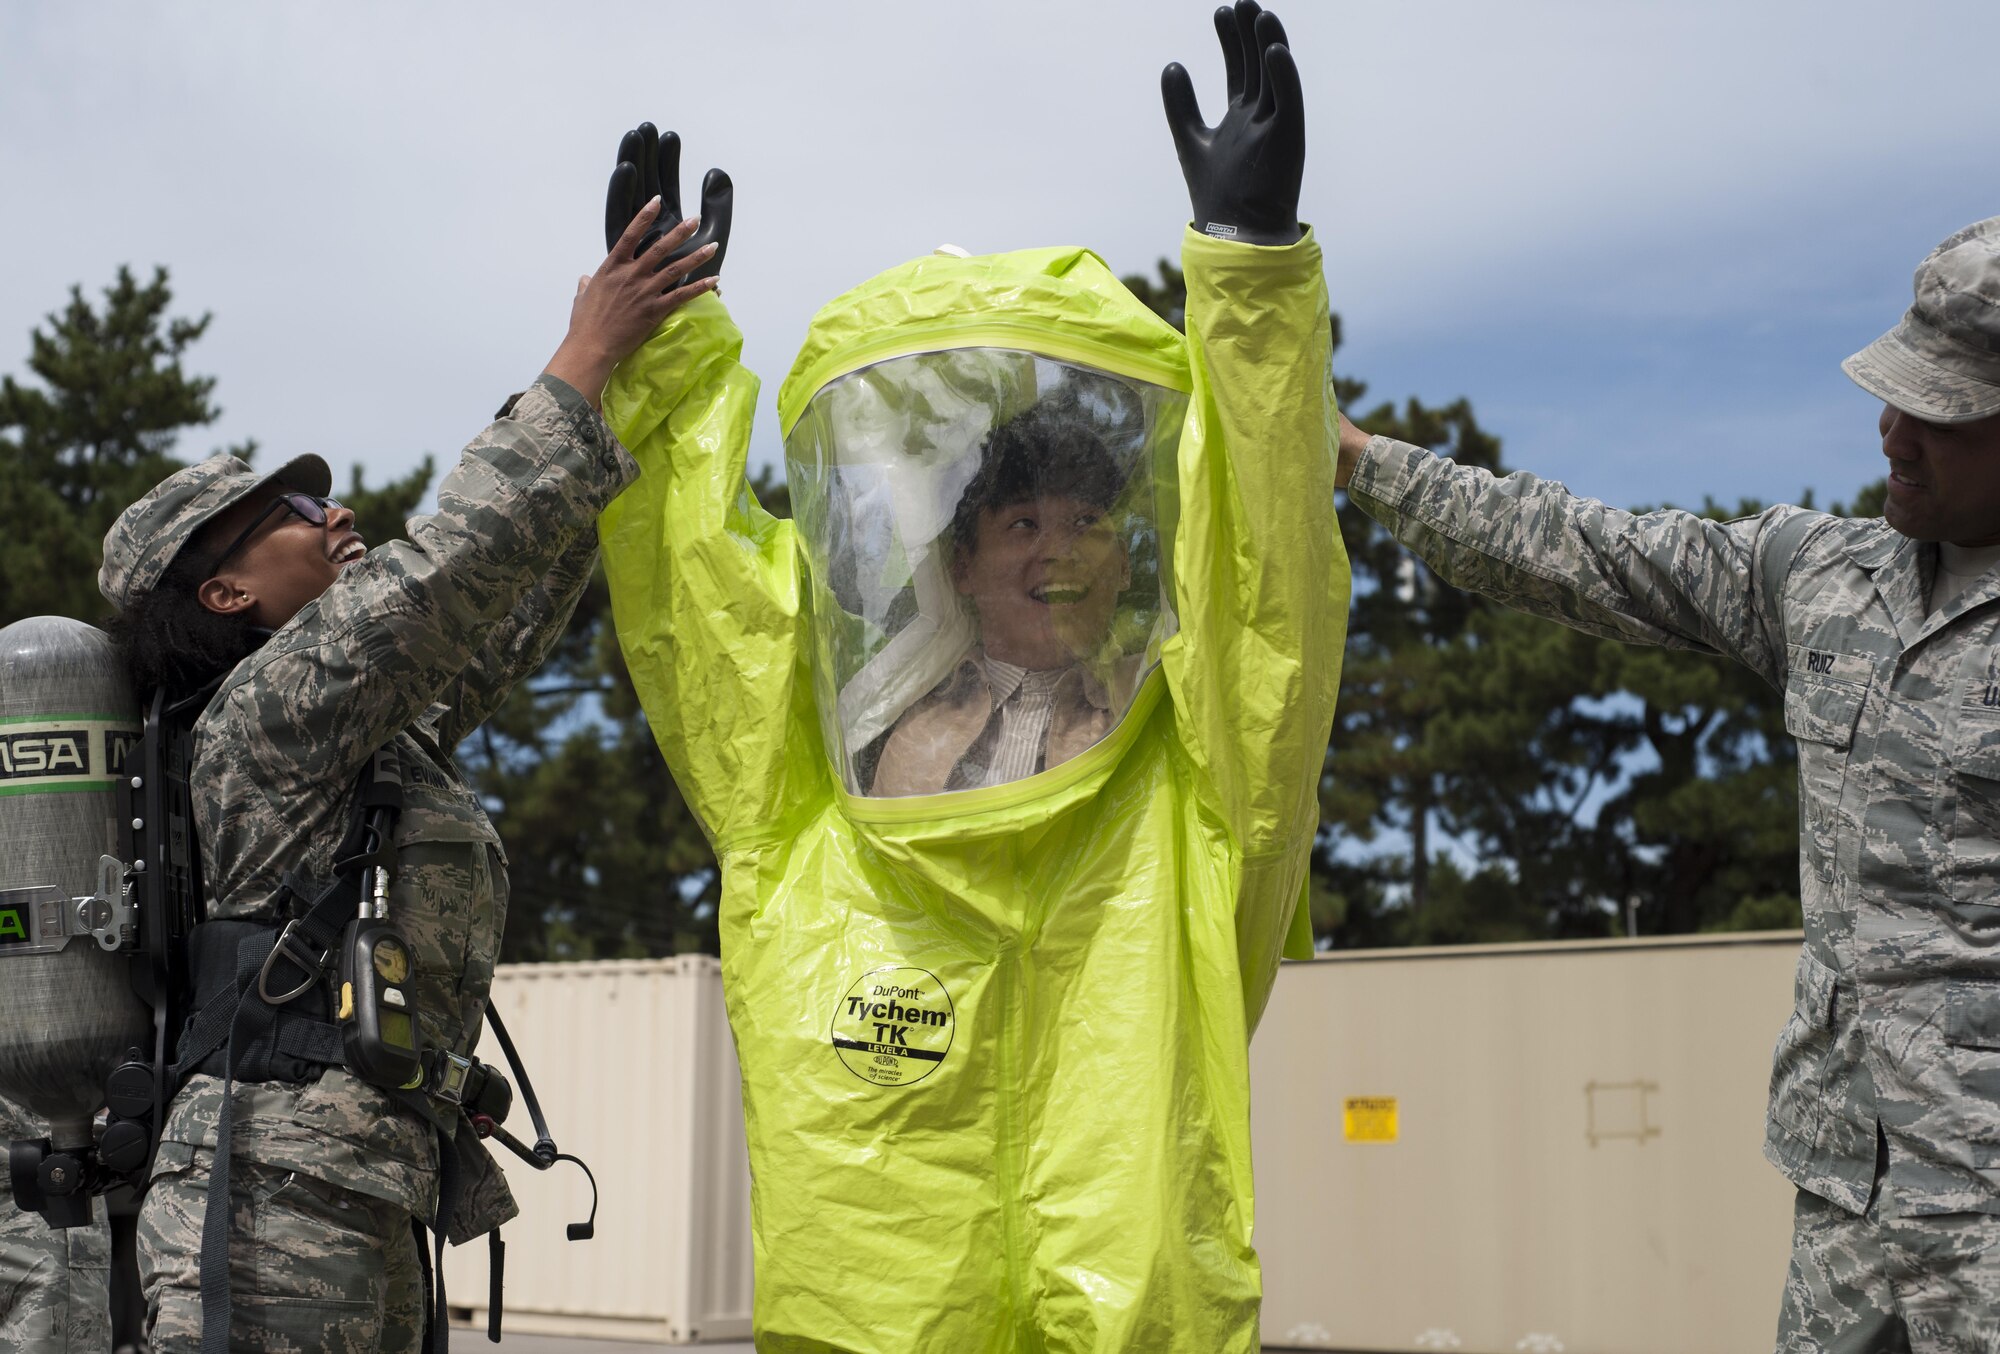 U.S. Air Force Master Sgt. Ambree Evans, 8th Medical Group Bioenvironmental Engineering health operations NCOIC, and Staff Sgt. Adam Ruiz, 8 MDG industrial hygiene NCOIC, help a student from Kunsan National University don protective gear while on tour at Kunsan Air Base, Republic of Korea, Sept. 29, 2017.  During the tour, the environmental engineering students were taught about the correlation between the environment and health and what the 8th MDG is doing to minimize risks to the Airmen and civilians on base. (U.S. Air Force photo by Staff Sgt. Victoria H. Taylor)